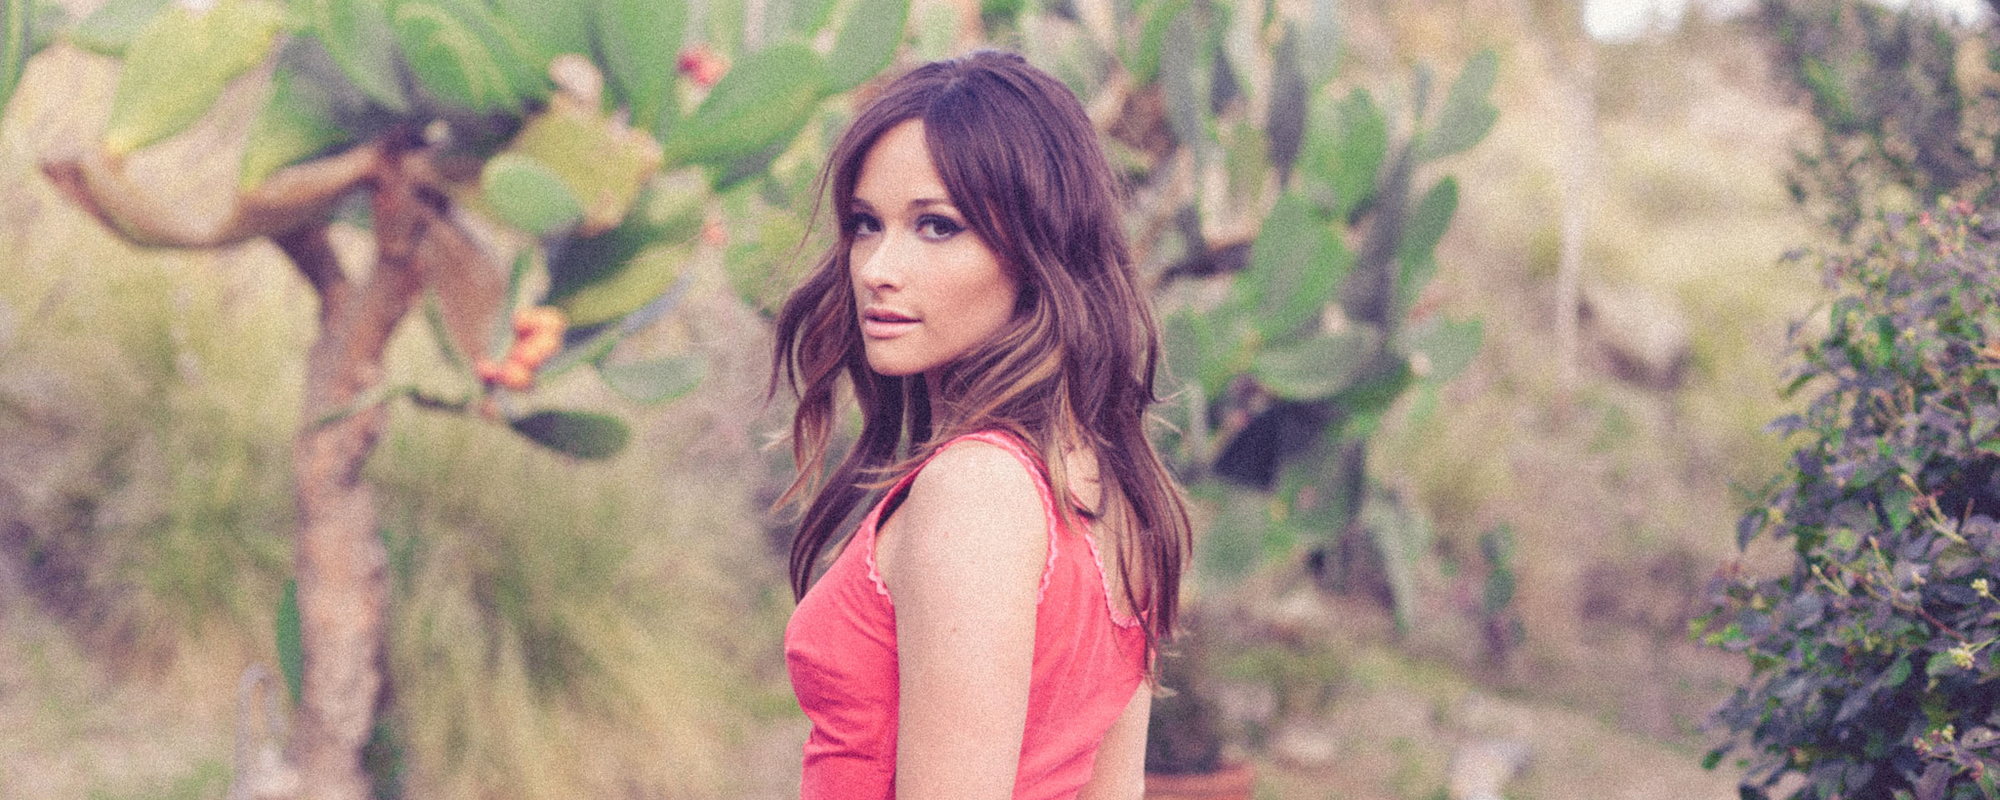 The Meaning Behind Kacey Musgraves’ Anthem for Acceptance “Follow Your Arrow”